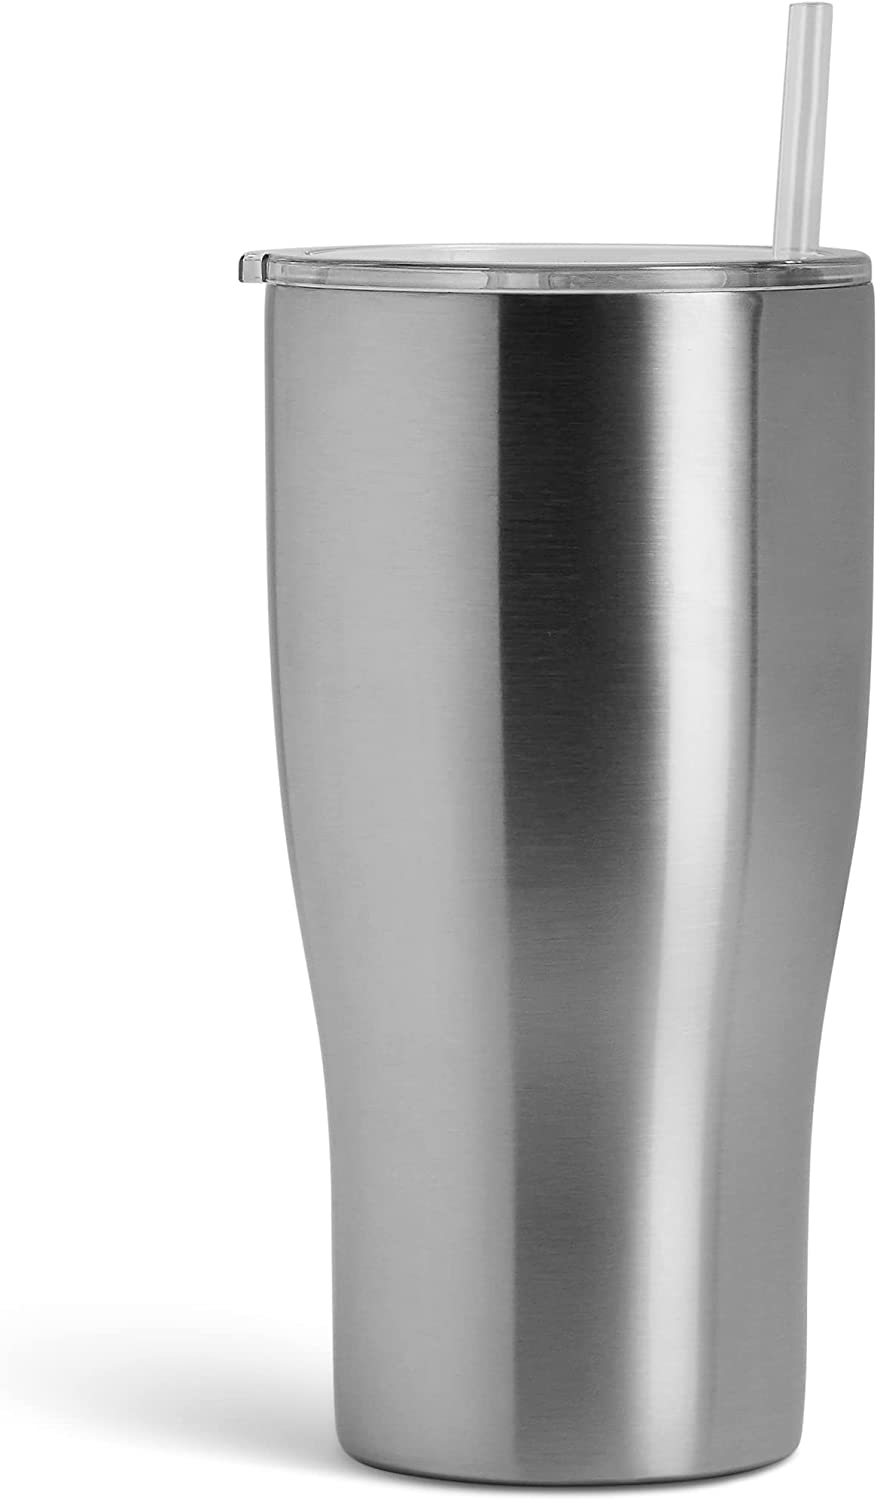 MakerFlo Crafts Curve Tumbler, Stainless Steel, Case of 25, 30oz